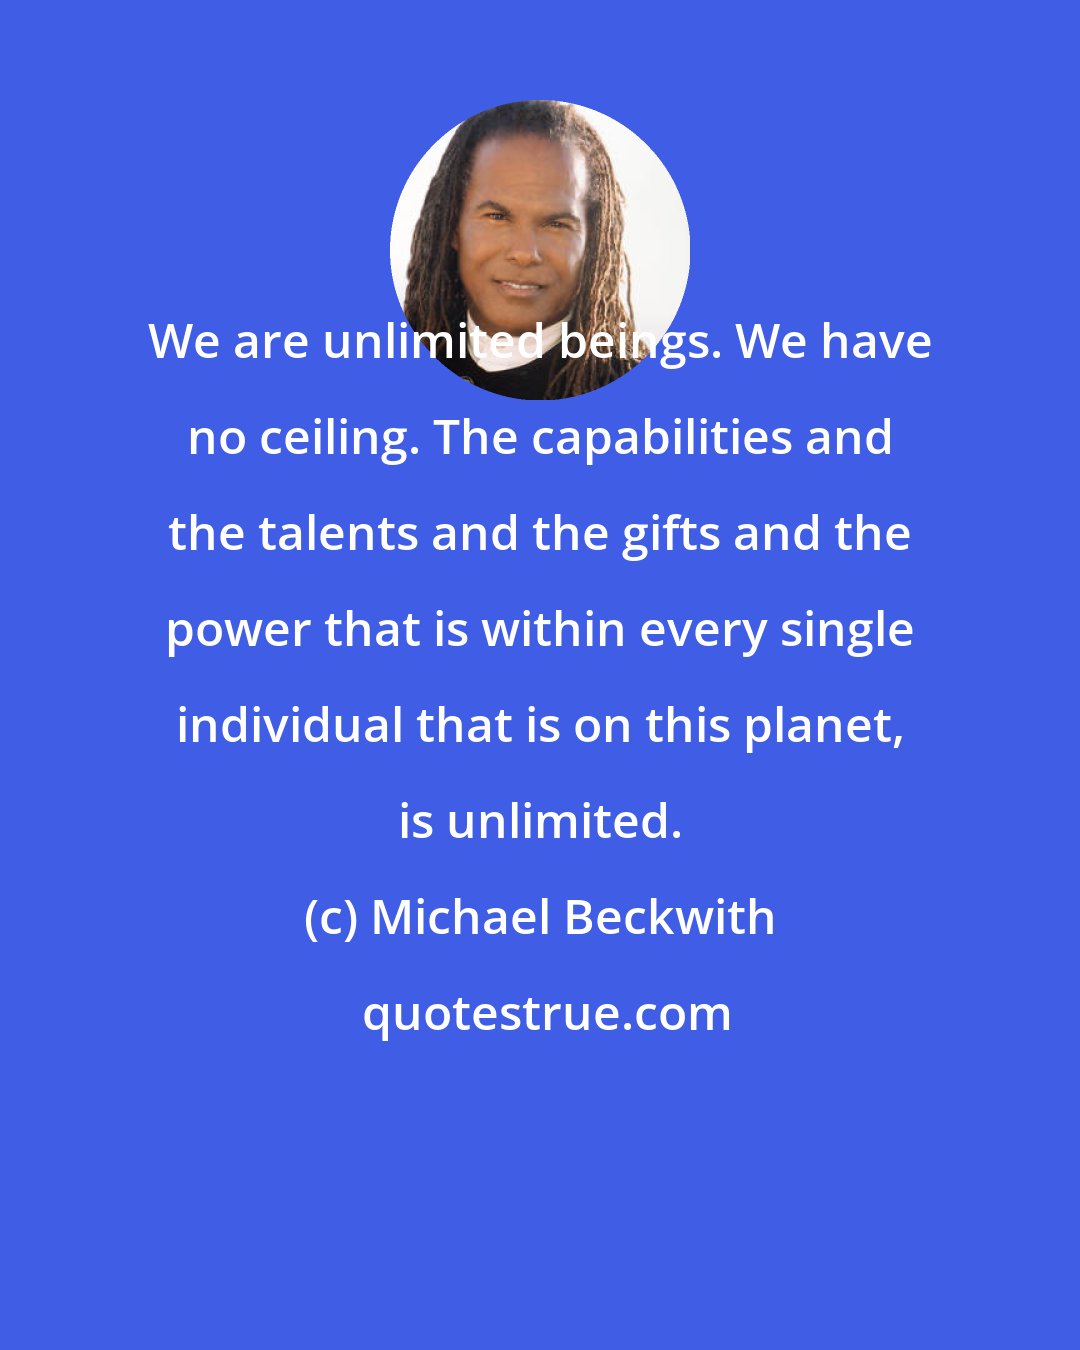 Michael Beckwith: We are unlimited beings. We have no ceiling. The capabilities and the talents and the gifts and the power that is within every single individual that is on this planet, is unlimited.